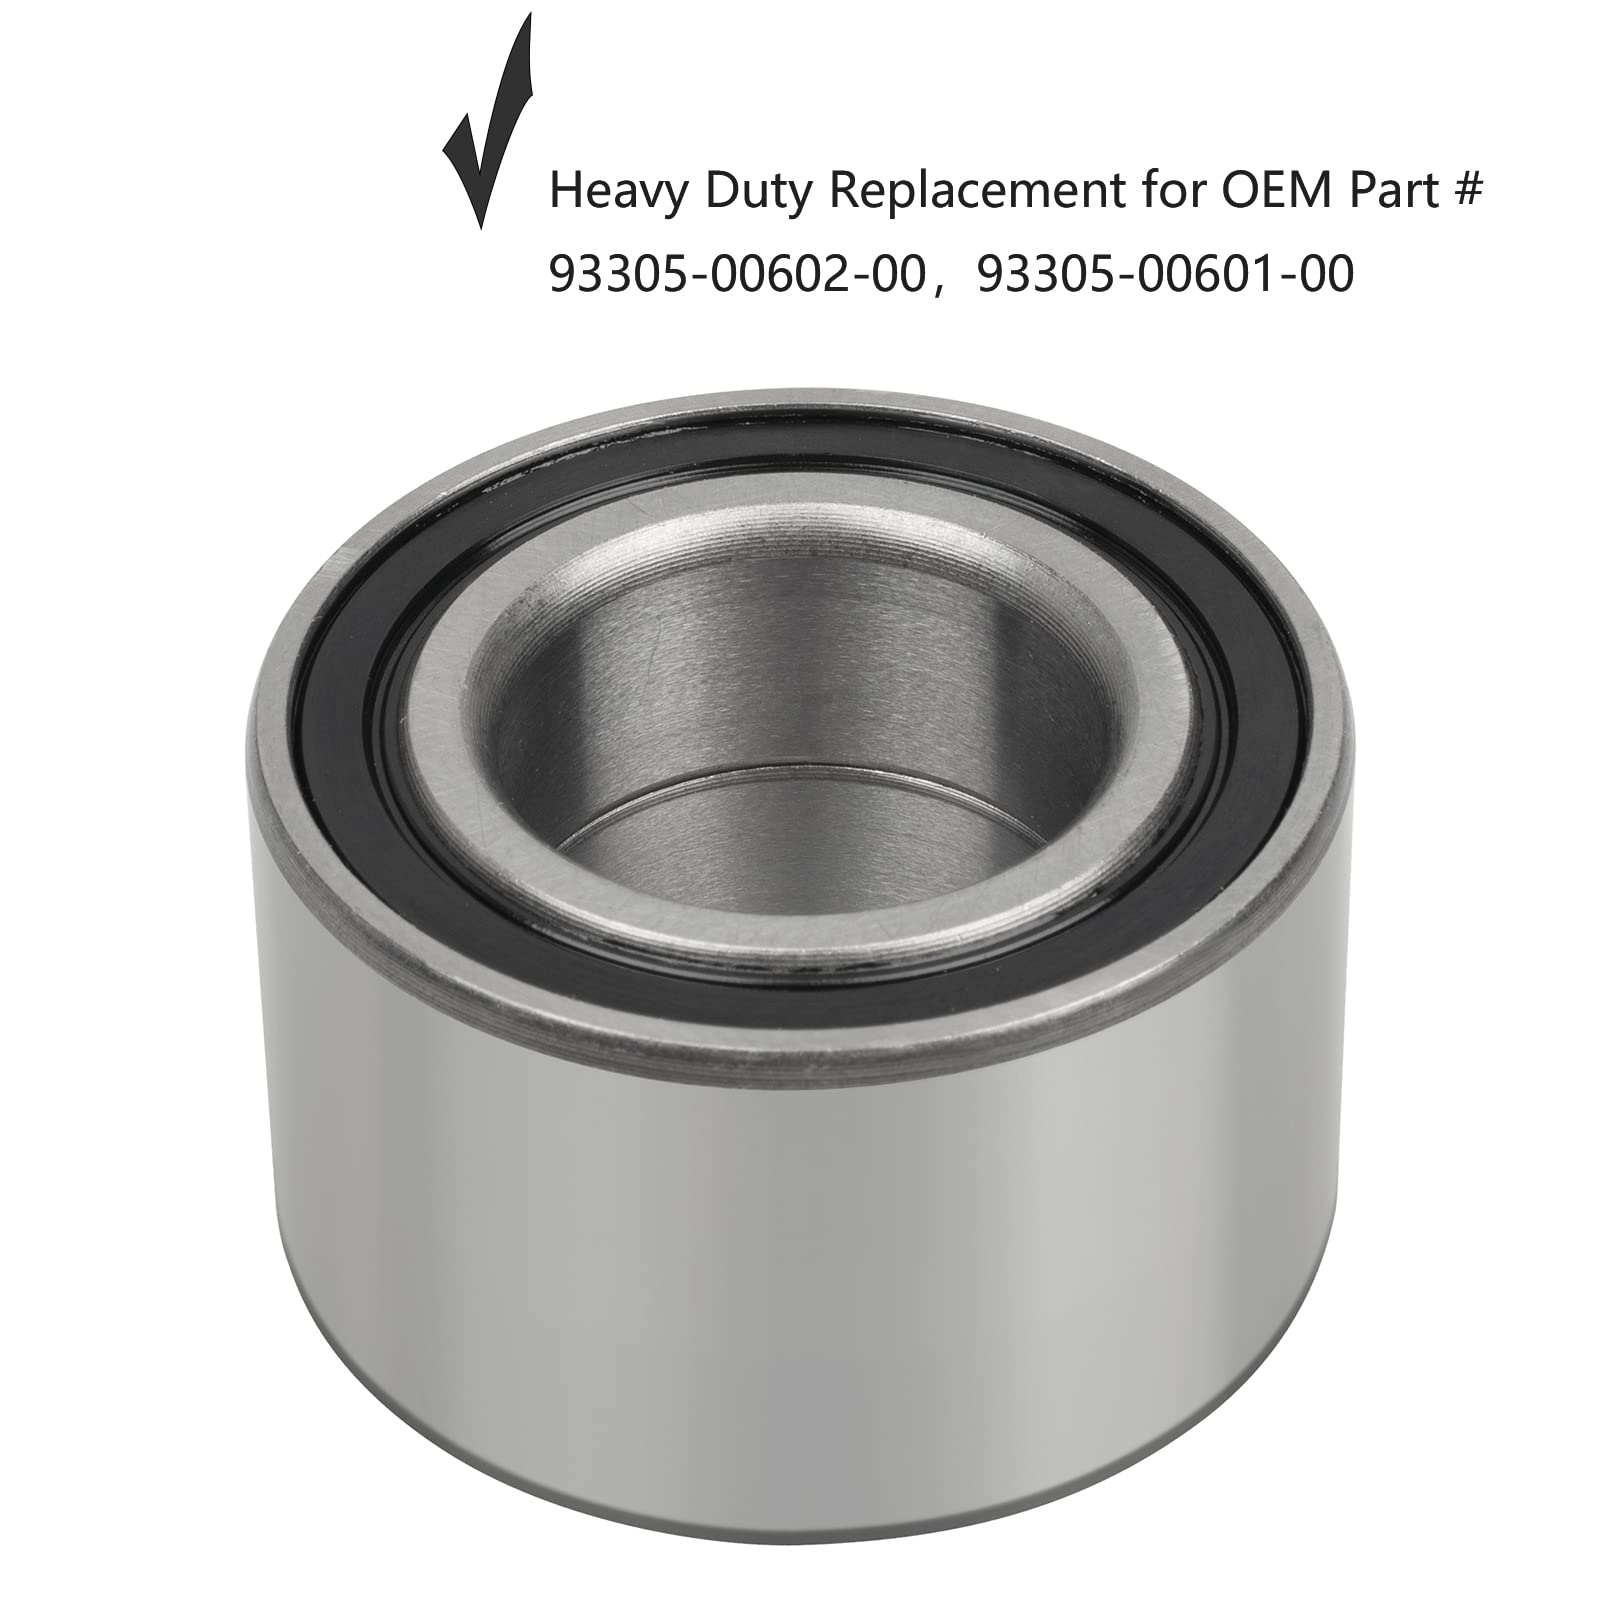 Front & Rear Wheel Bearings Replacement for Yamaha Grizzly 4x4 700 660 550 450 400 YFM700 YFM660 YFM550 YFM450 YFM400, Replace Part Number 93305-00602-00，93305-00601-00